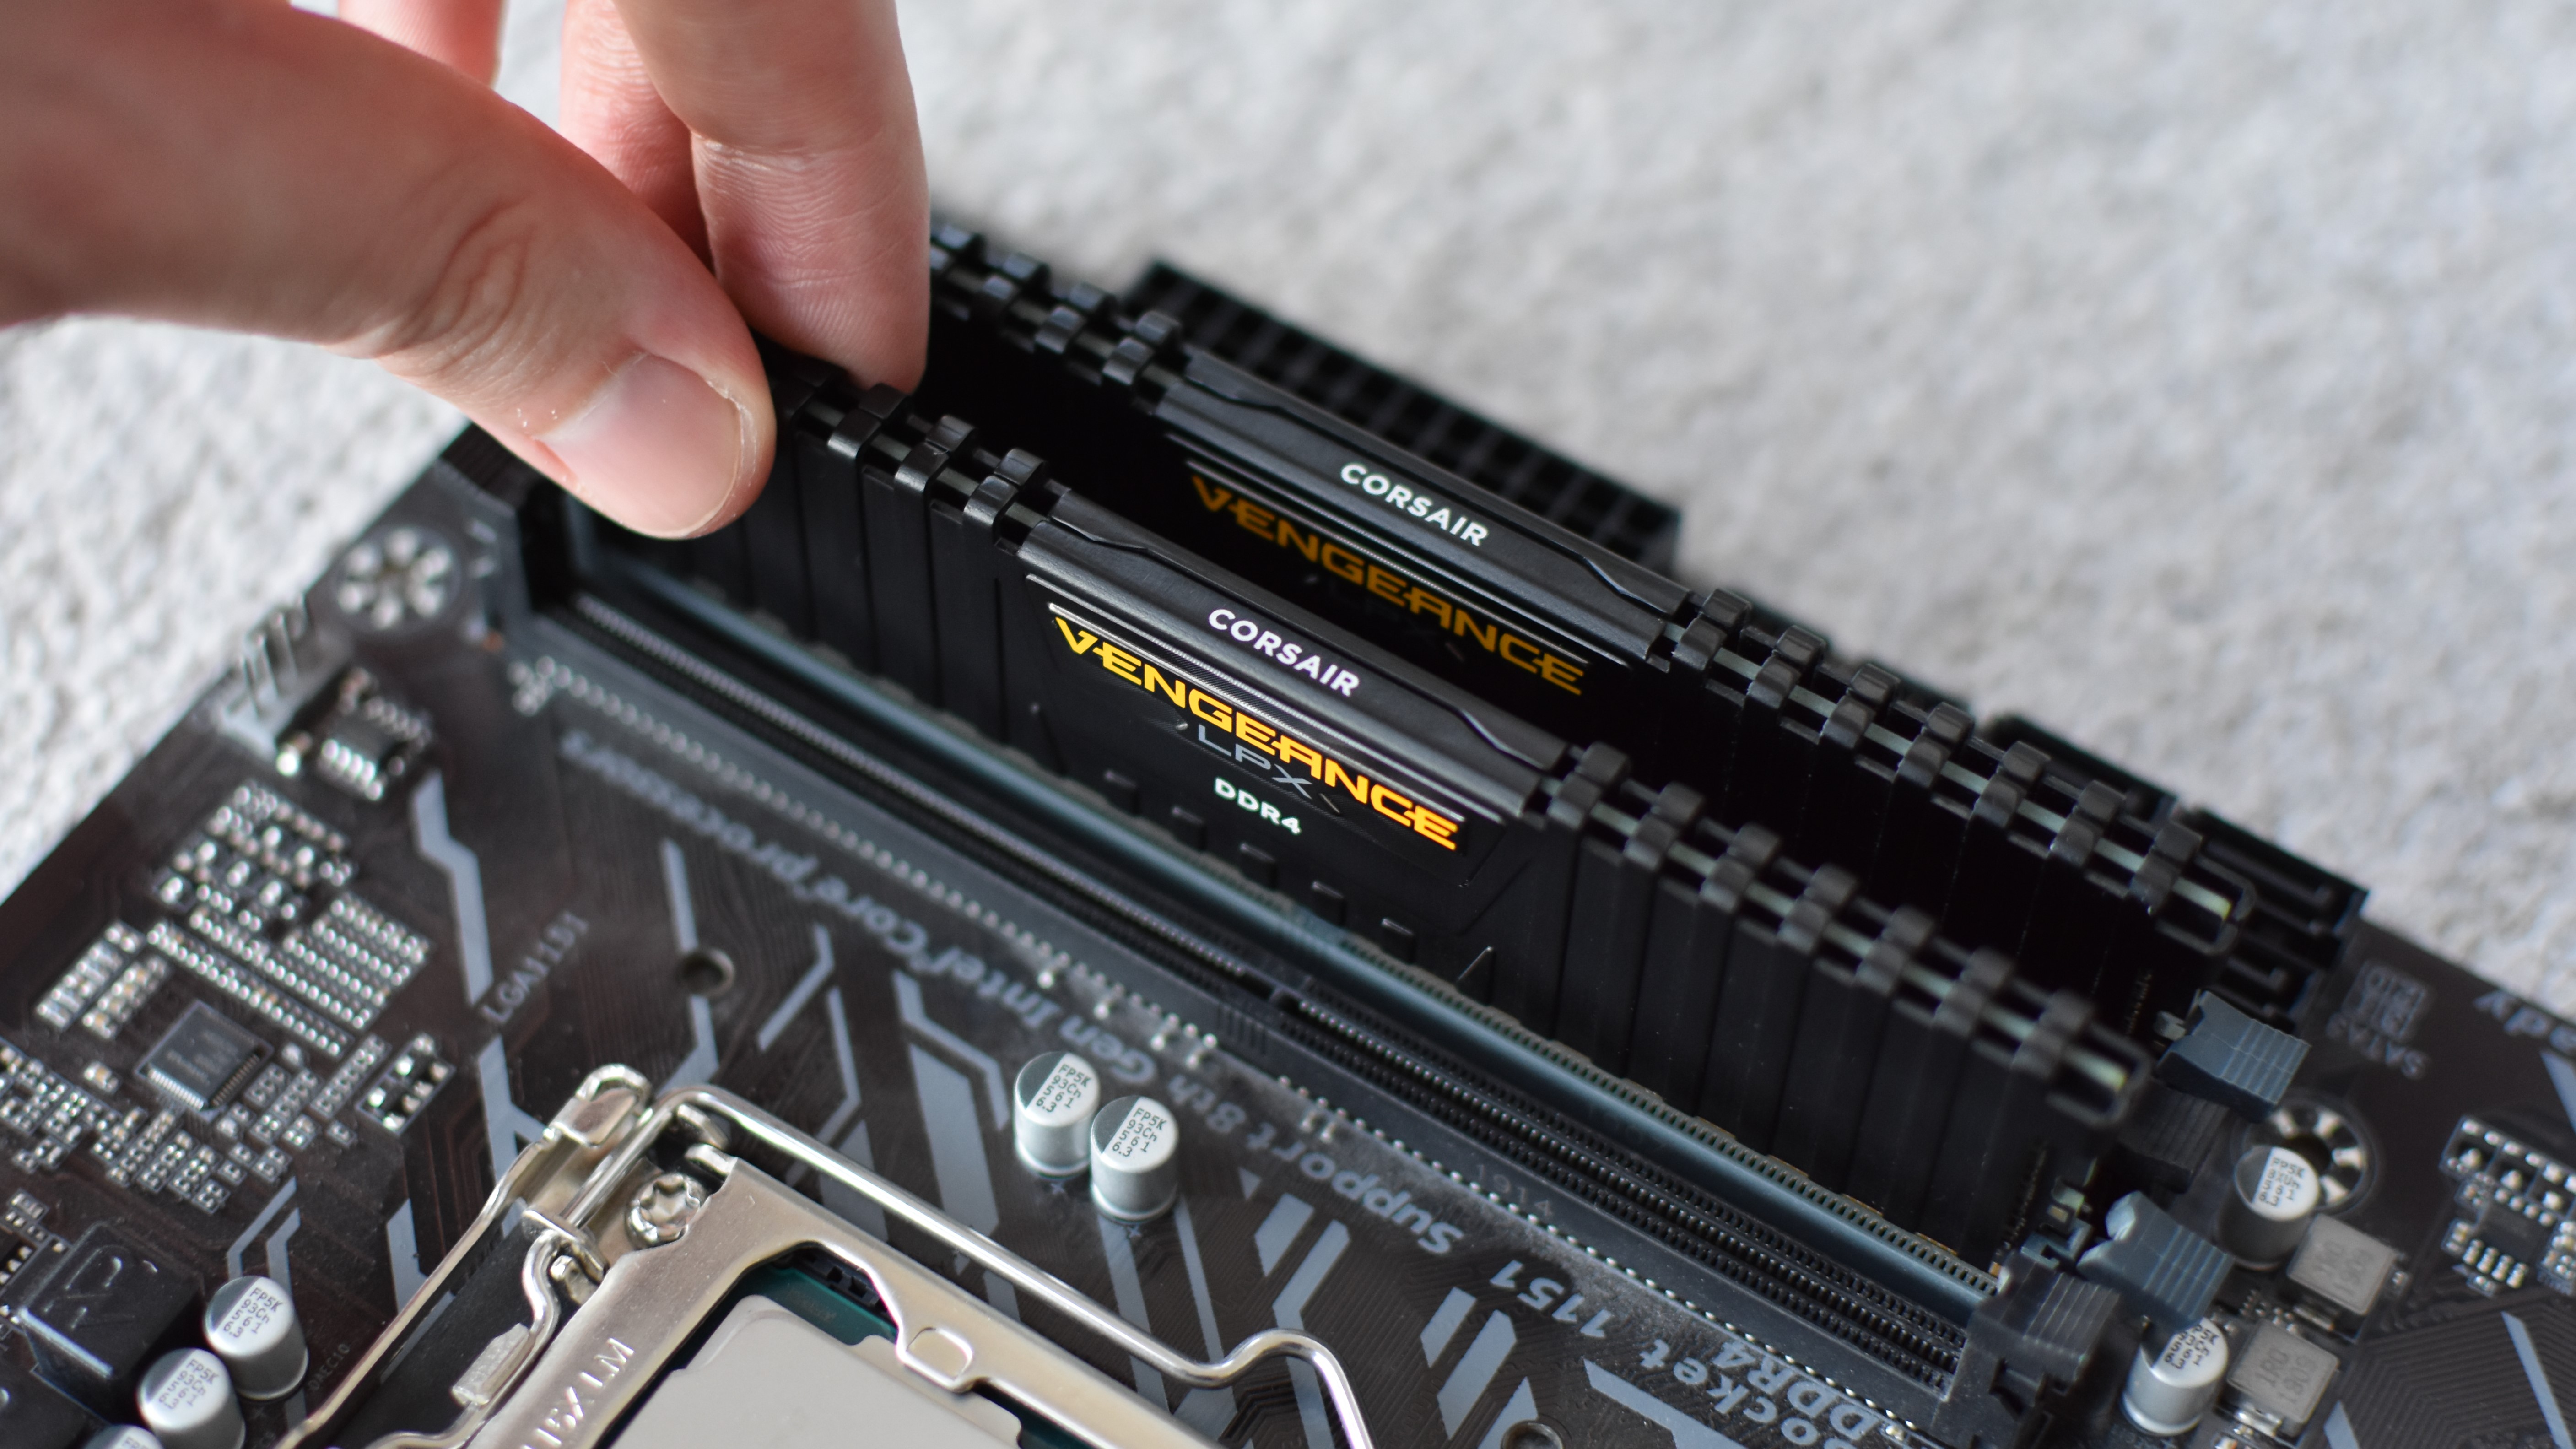 Two sticks of DDR4 RAM being installed in a motherboard.